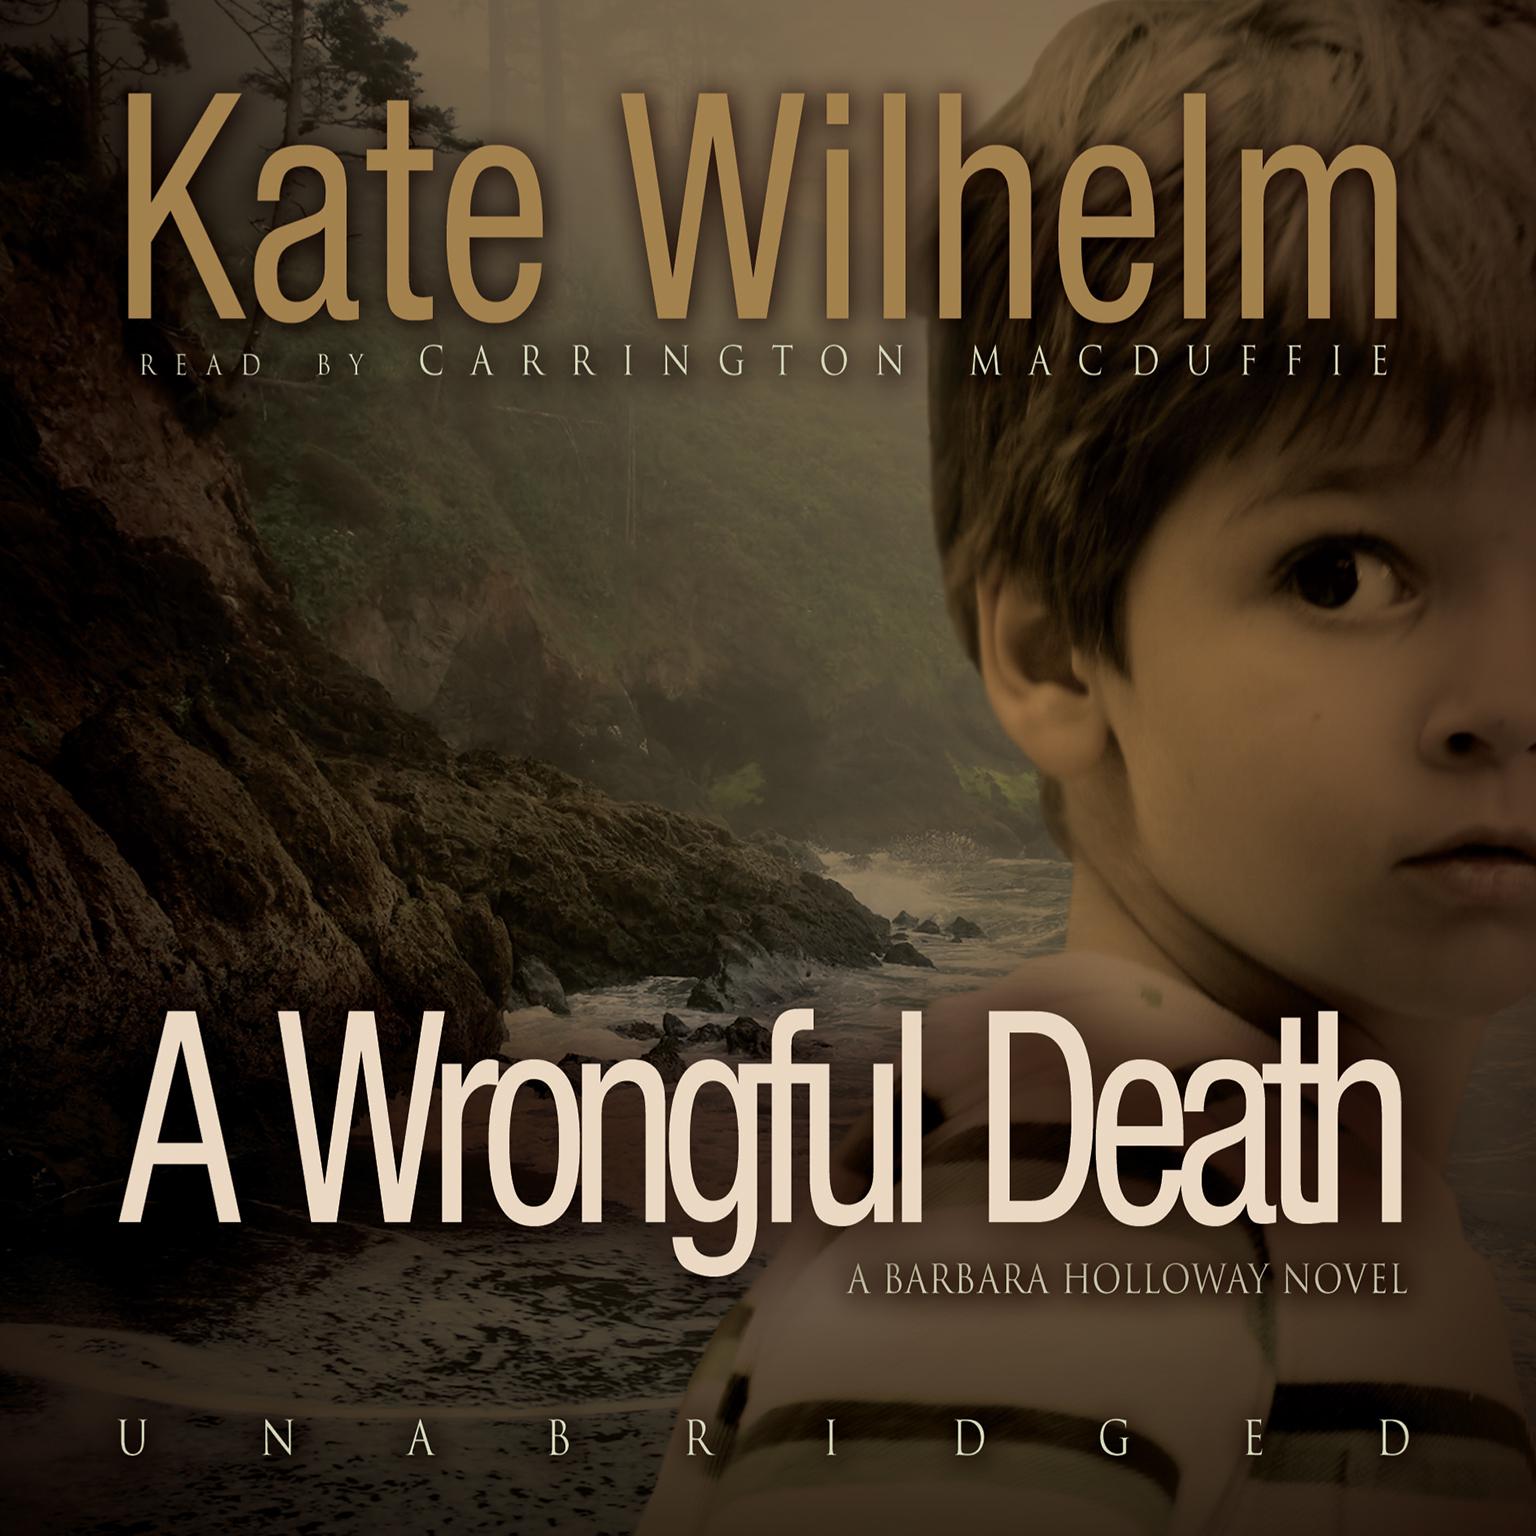 A Wrongful Death Audiobook, by Kate Wilhelm